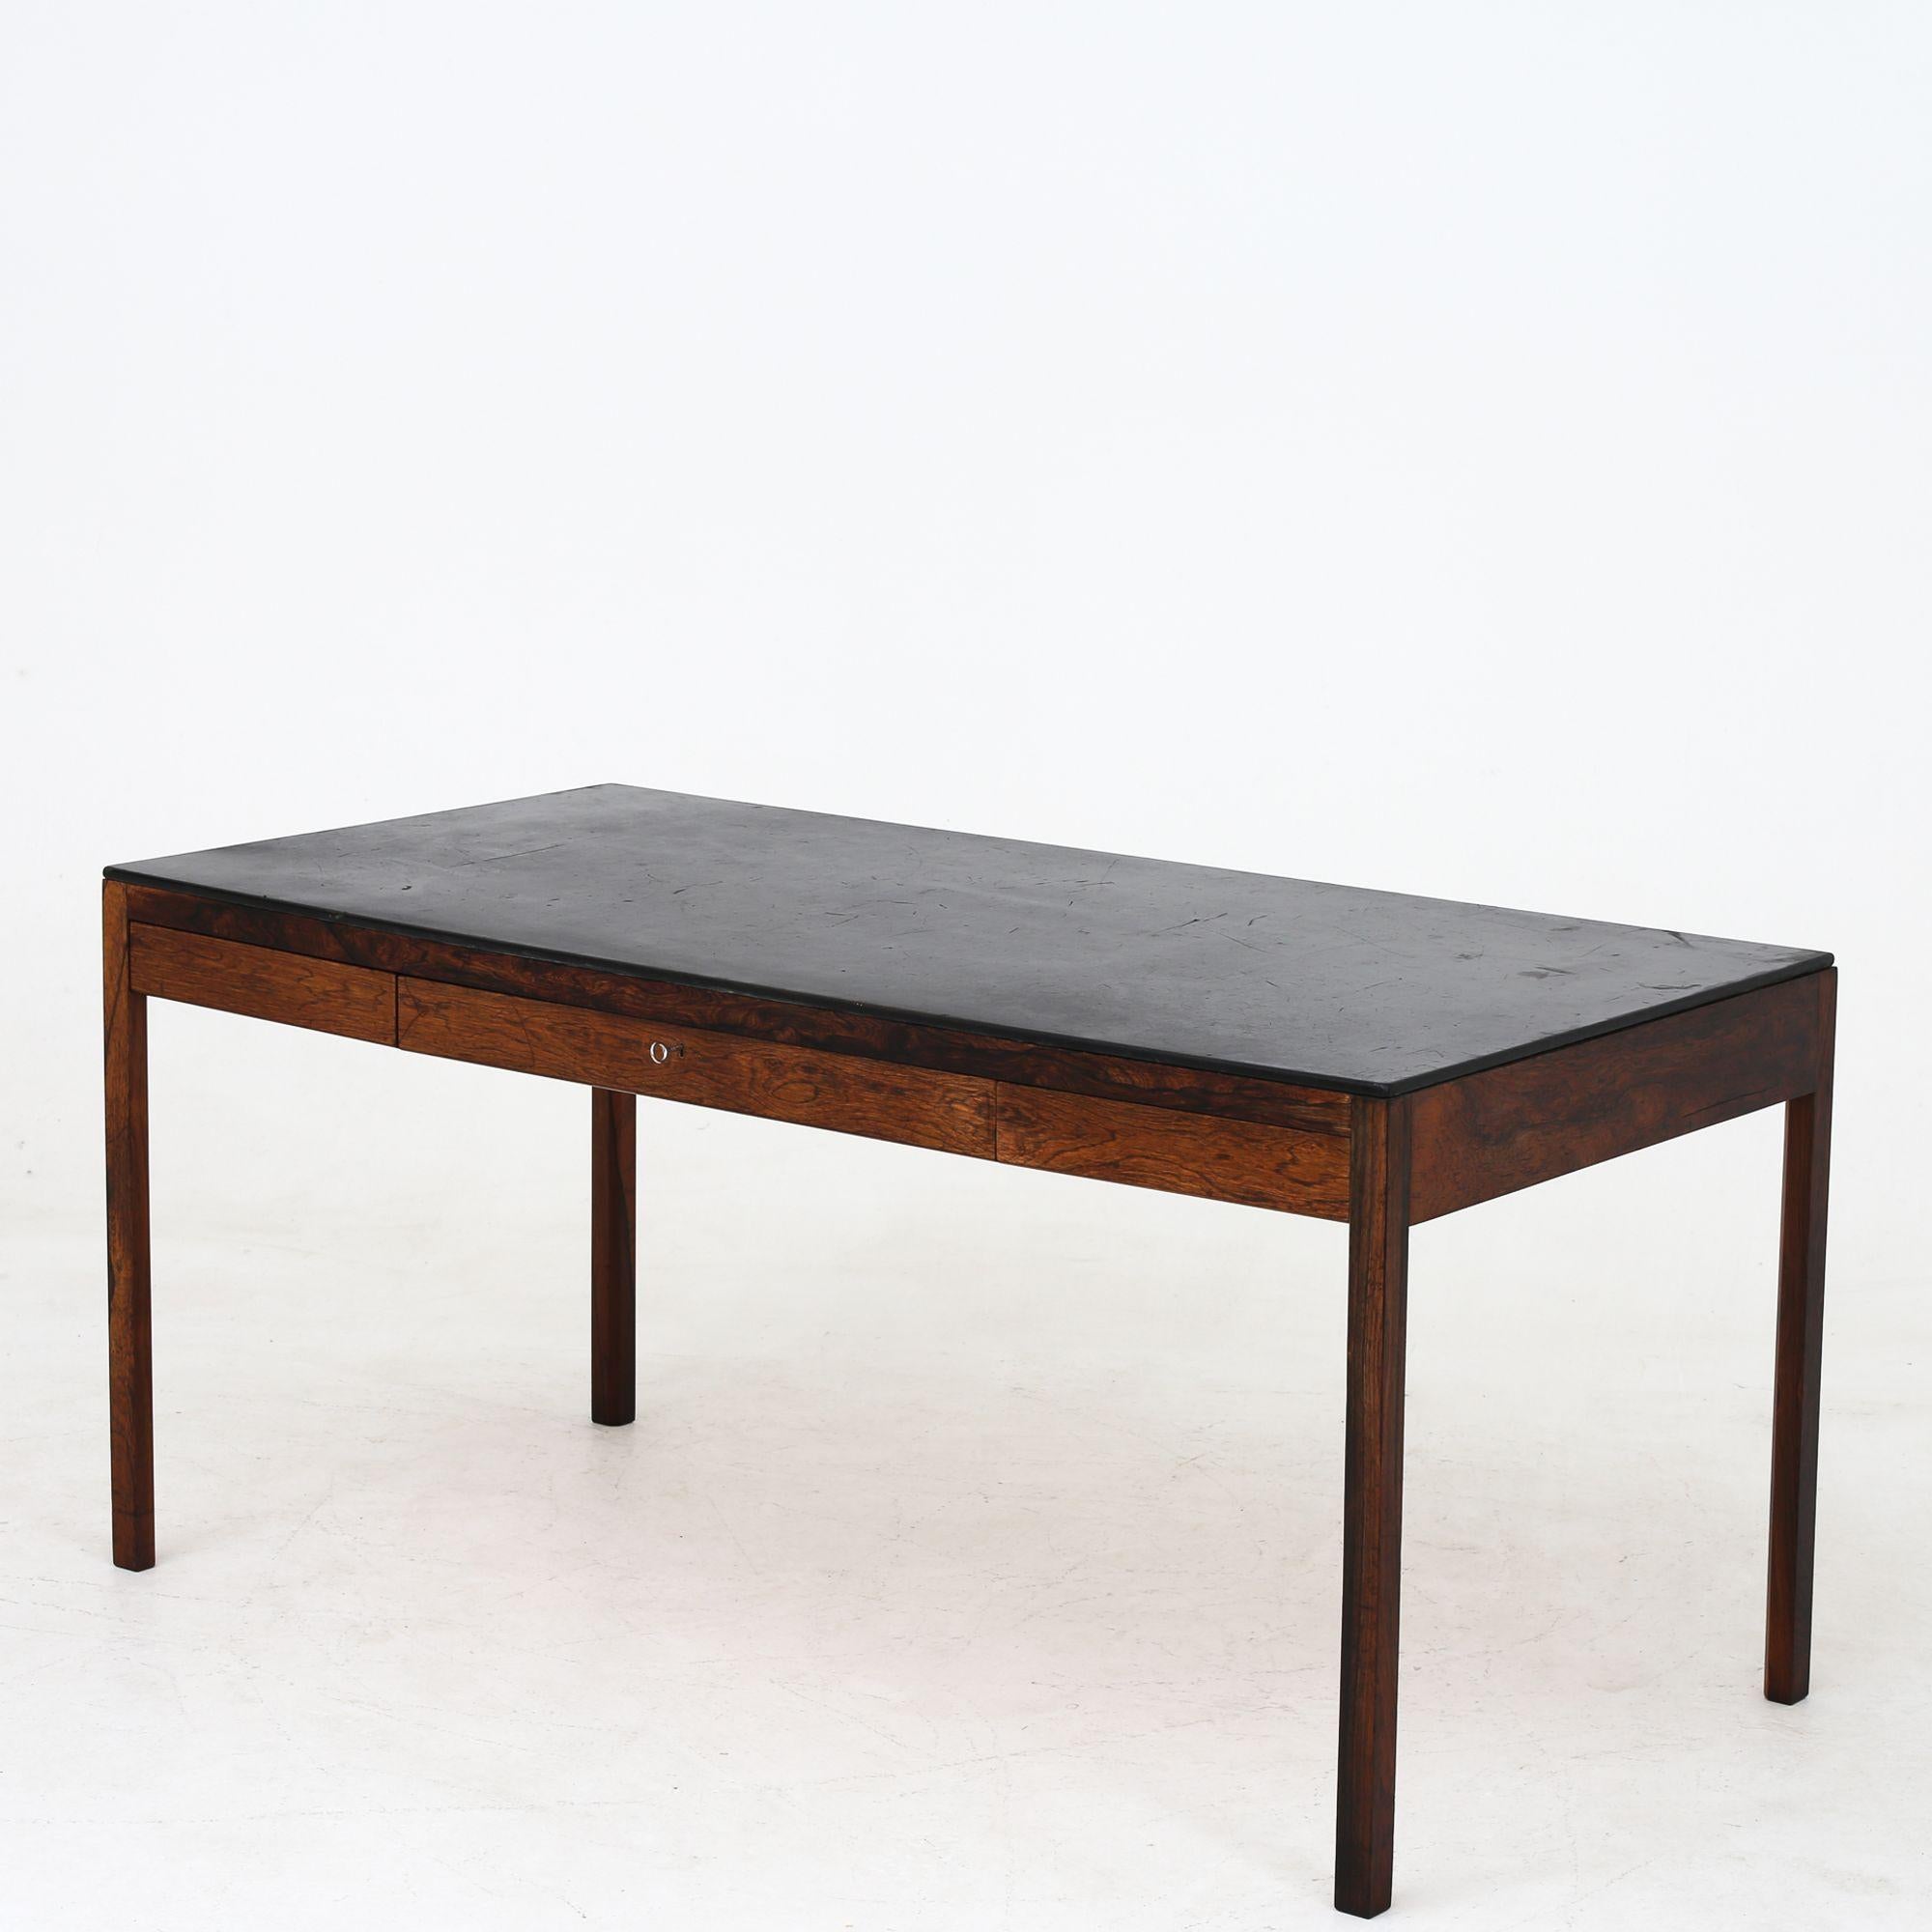 Rare desk in Brazilian rosewood with original leather top of black leather. This specific desk is from the home of Willy Beck. Architects Ejnar Larsen & Aksel Bender Madsen / maker Willy Beck.